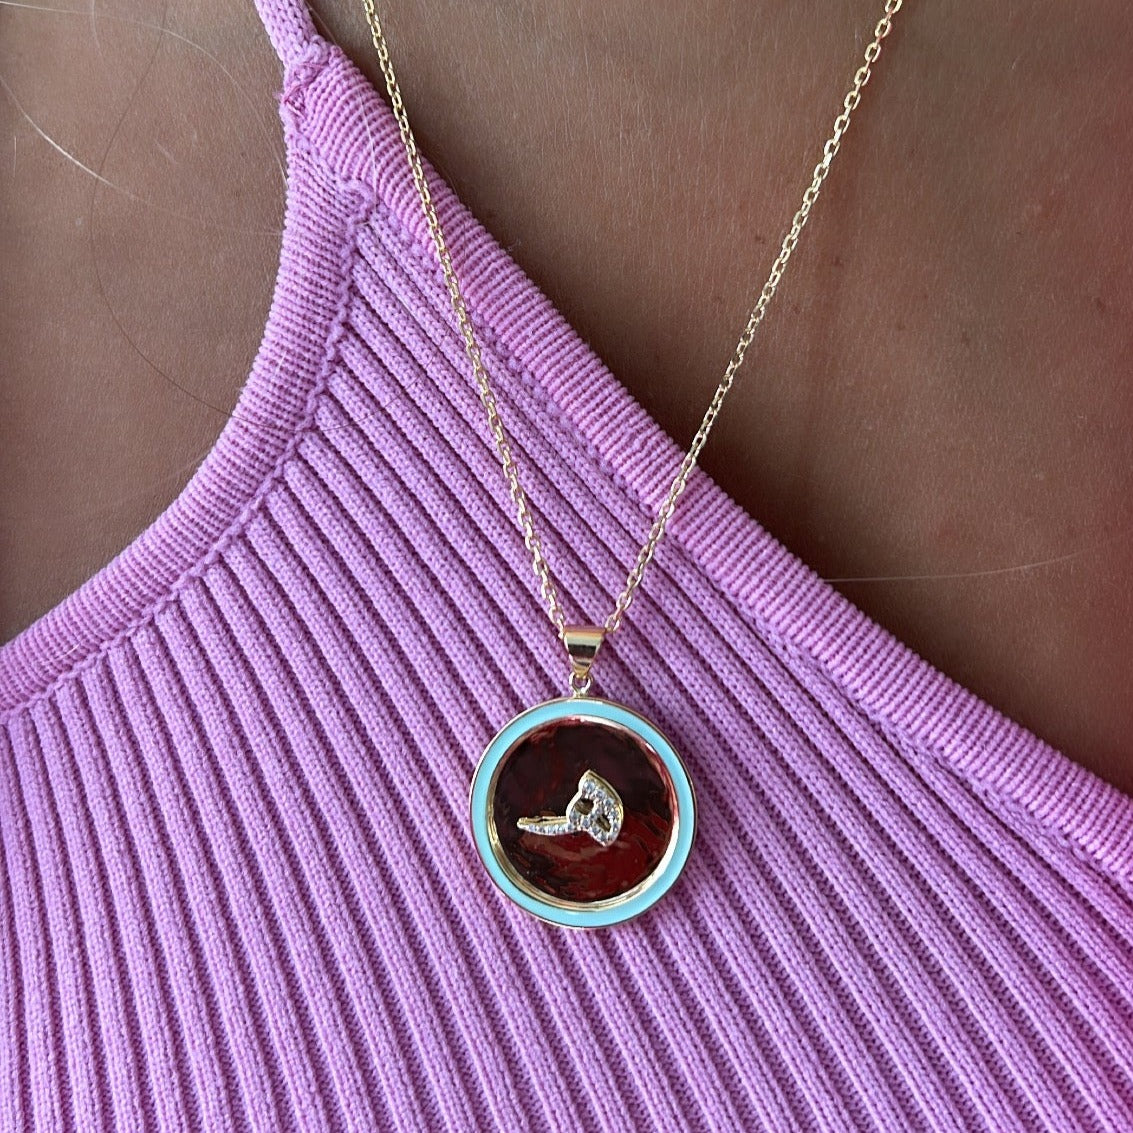 Customized Enamel Coin Necklace